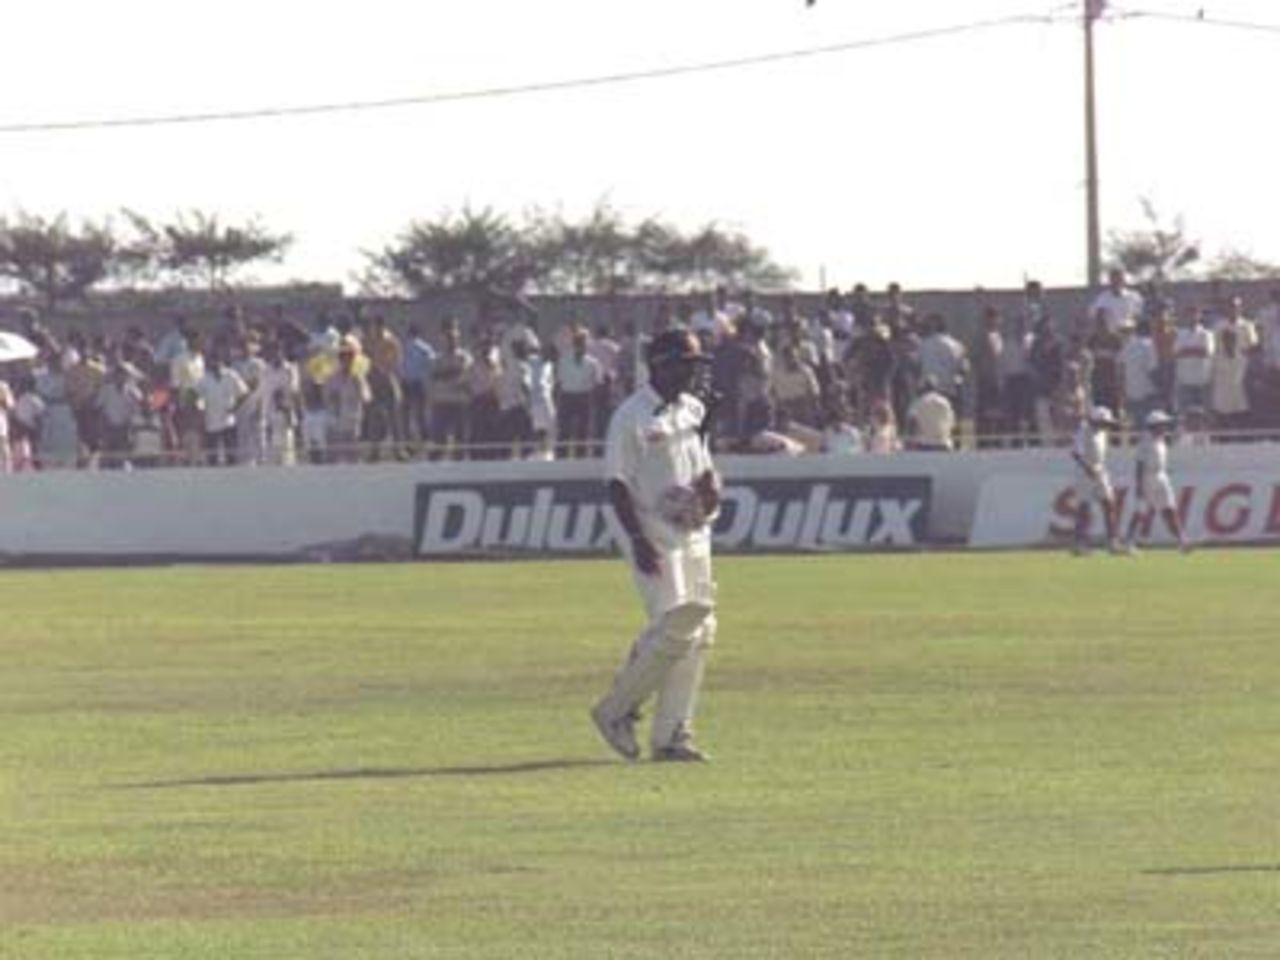 Muralitharan's cameo comes to an end, Pakistan v Sri Lanka, 2nd Test at Galle, 21-25 June 2000